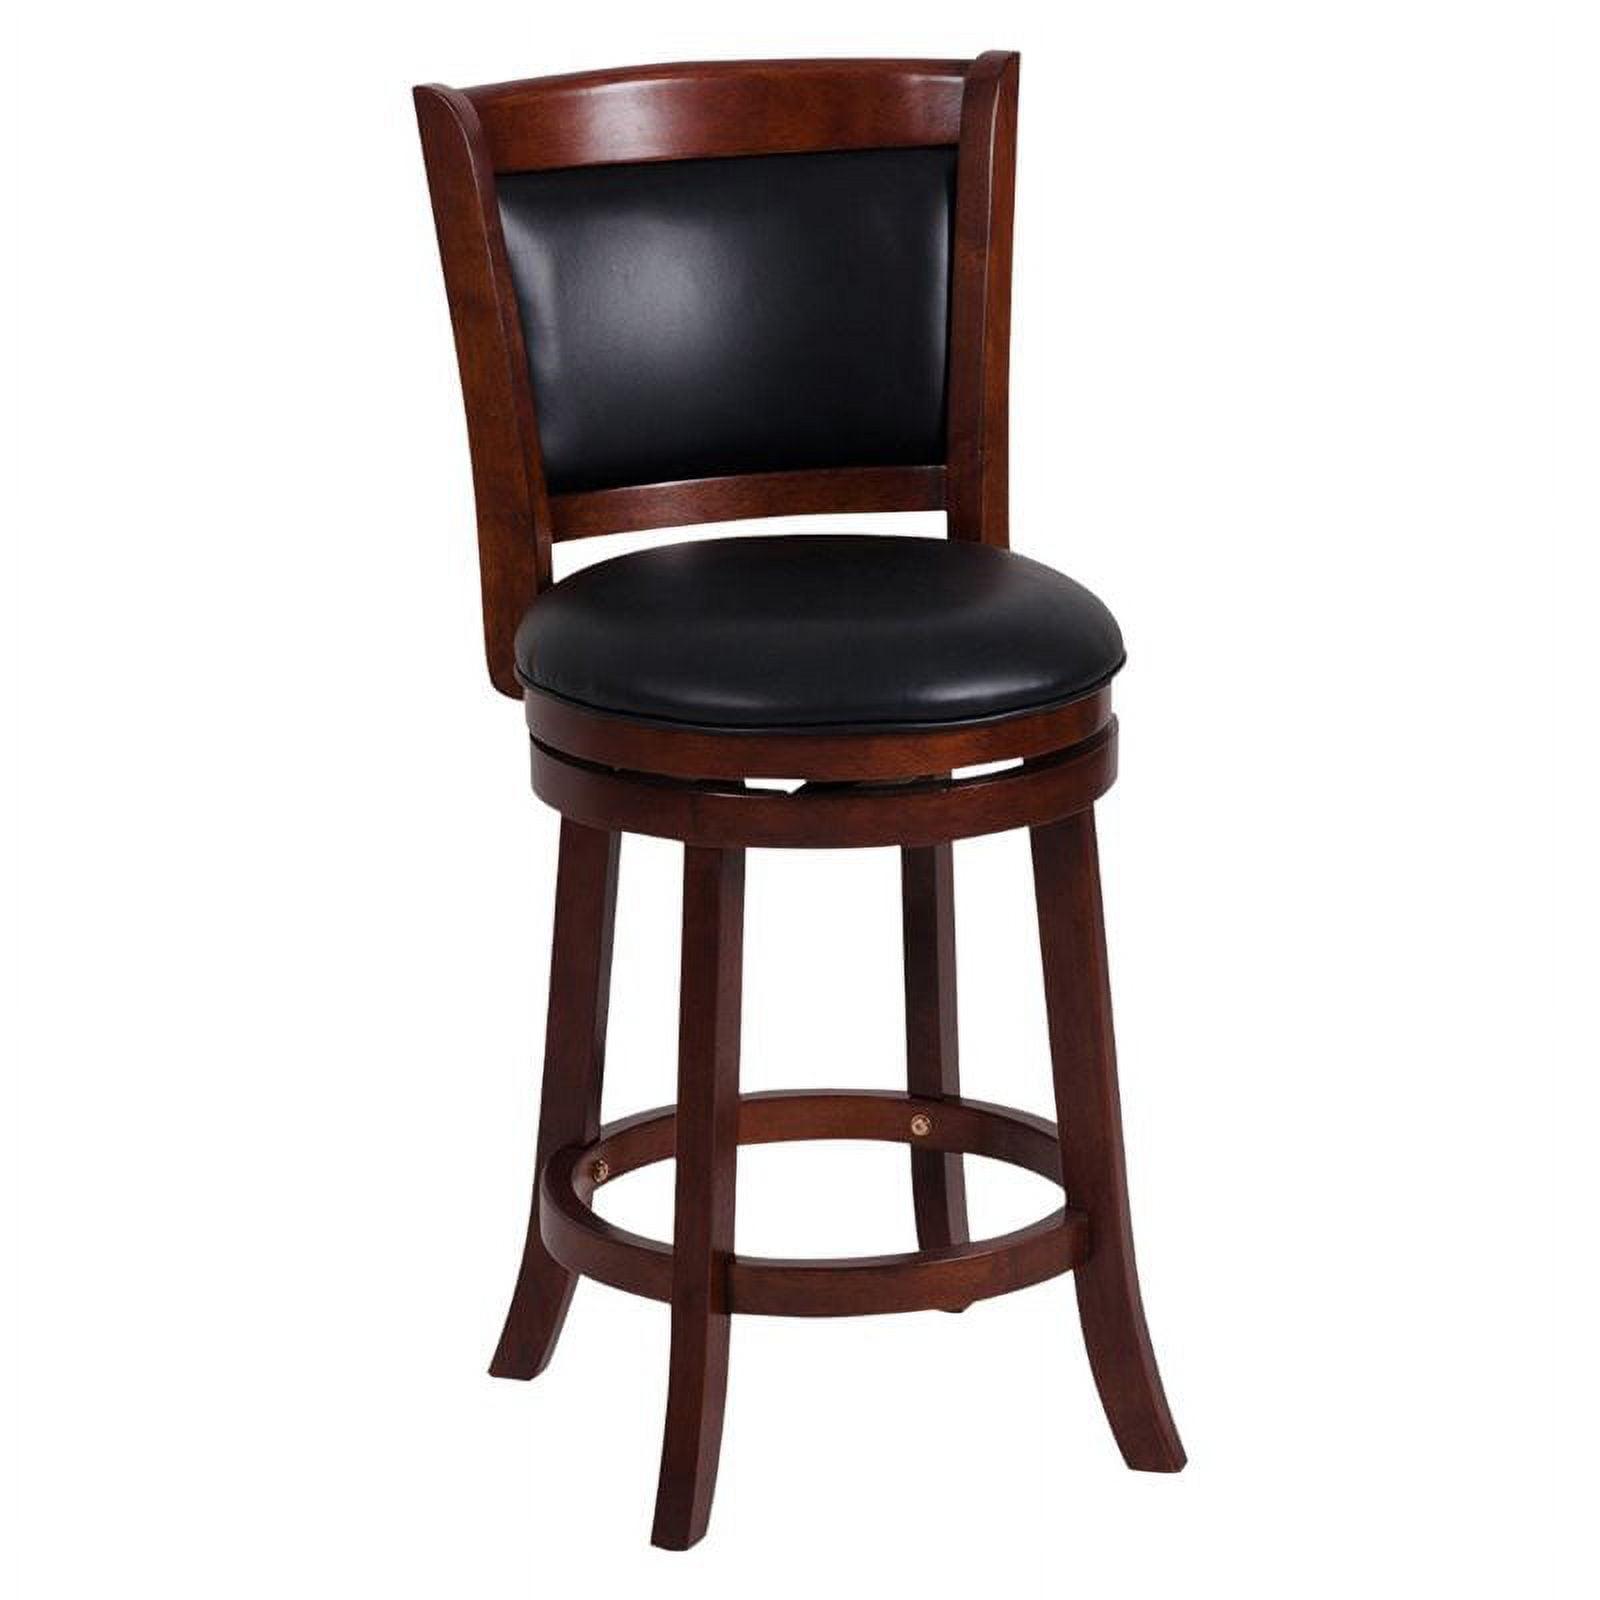 Elegant Cherry Swivel Counter Stool with Black Faux Leather